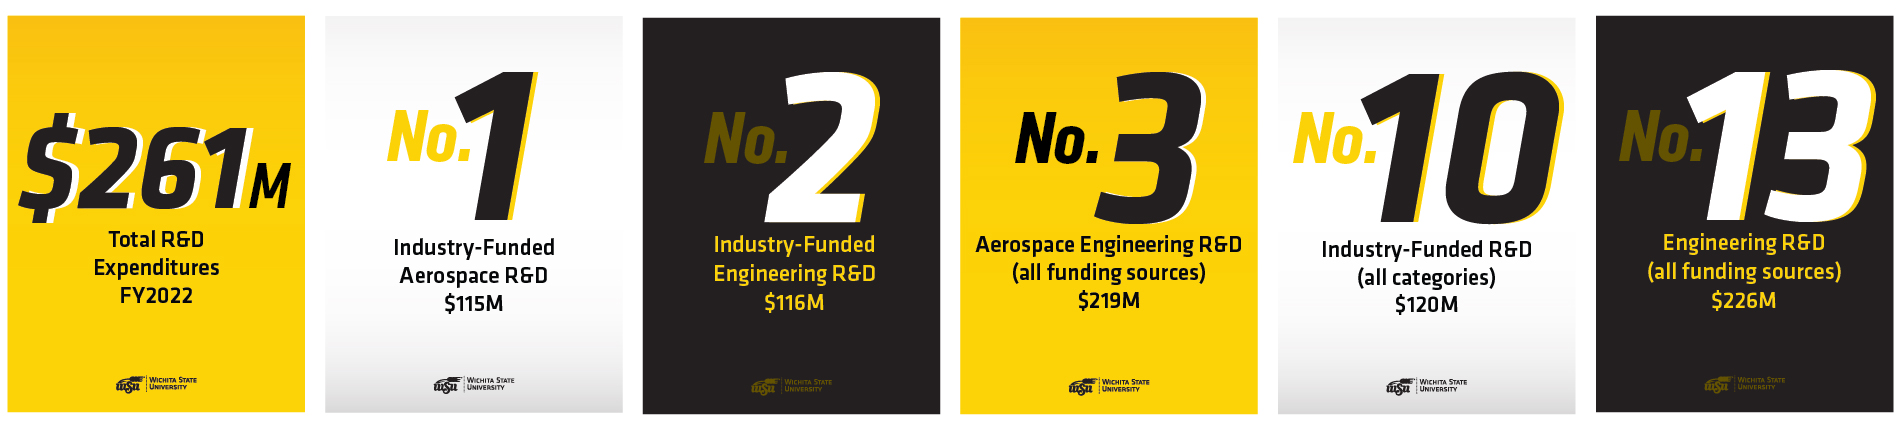 NSF Rankings by the Numbers Block 1: $261M Total R&D Expenditures FY2022 Block 2: 1st Industry-Funded Aerospace R&D (flipside or below) $115M Block 3: 2nd Industry-Funded Engineering R&D $116M Block 4: 3rd Aerospace Engineering R&D (all funding sources) $219M Block 5: 10th Industry-Funded R&D (all categories) $120 Million Block 6: 13th Engineering R&D (all funding sources) $226M Source: National Science Foundation Higher Education Research & Development Survey FY 2022